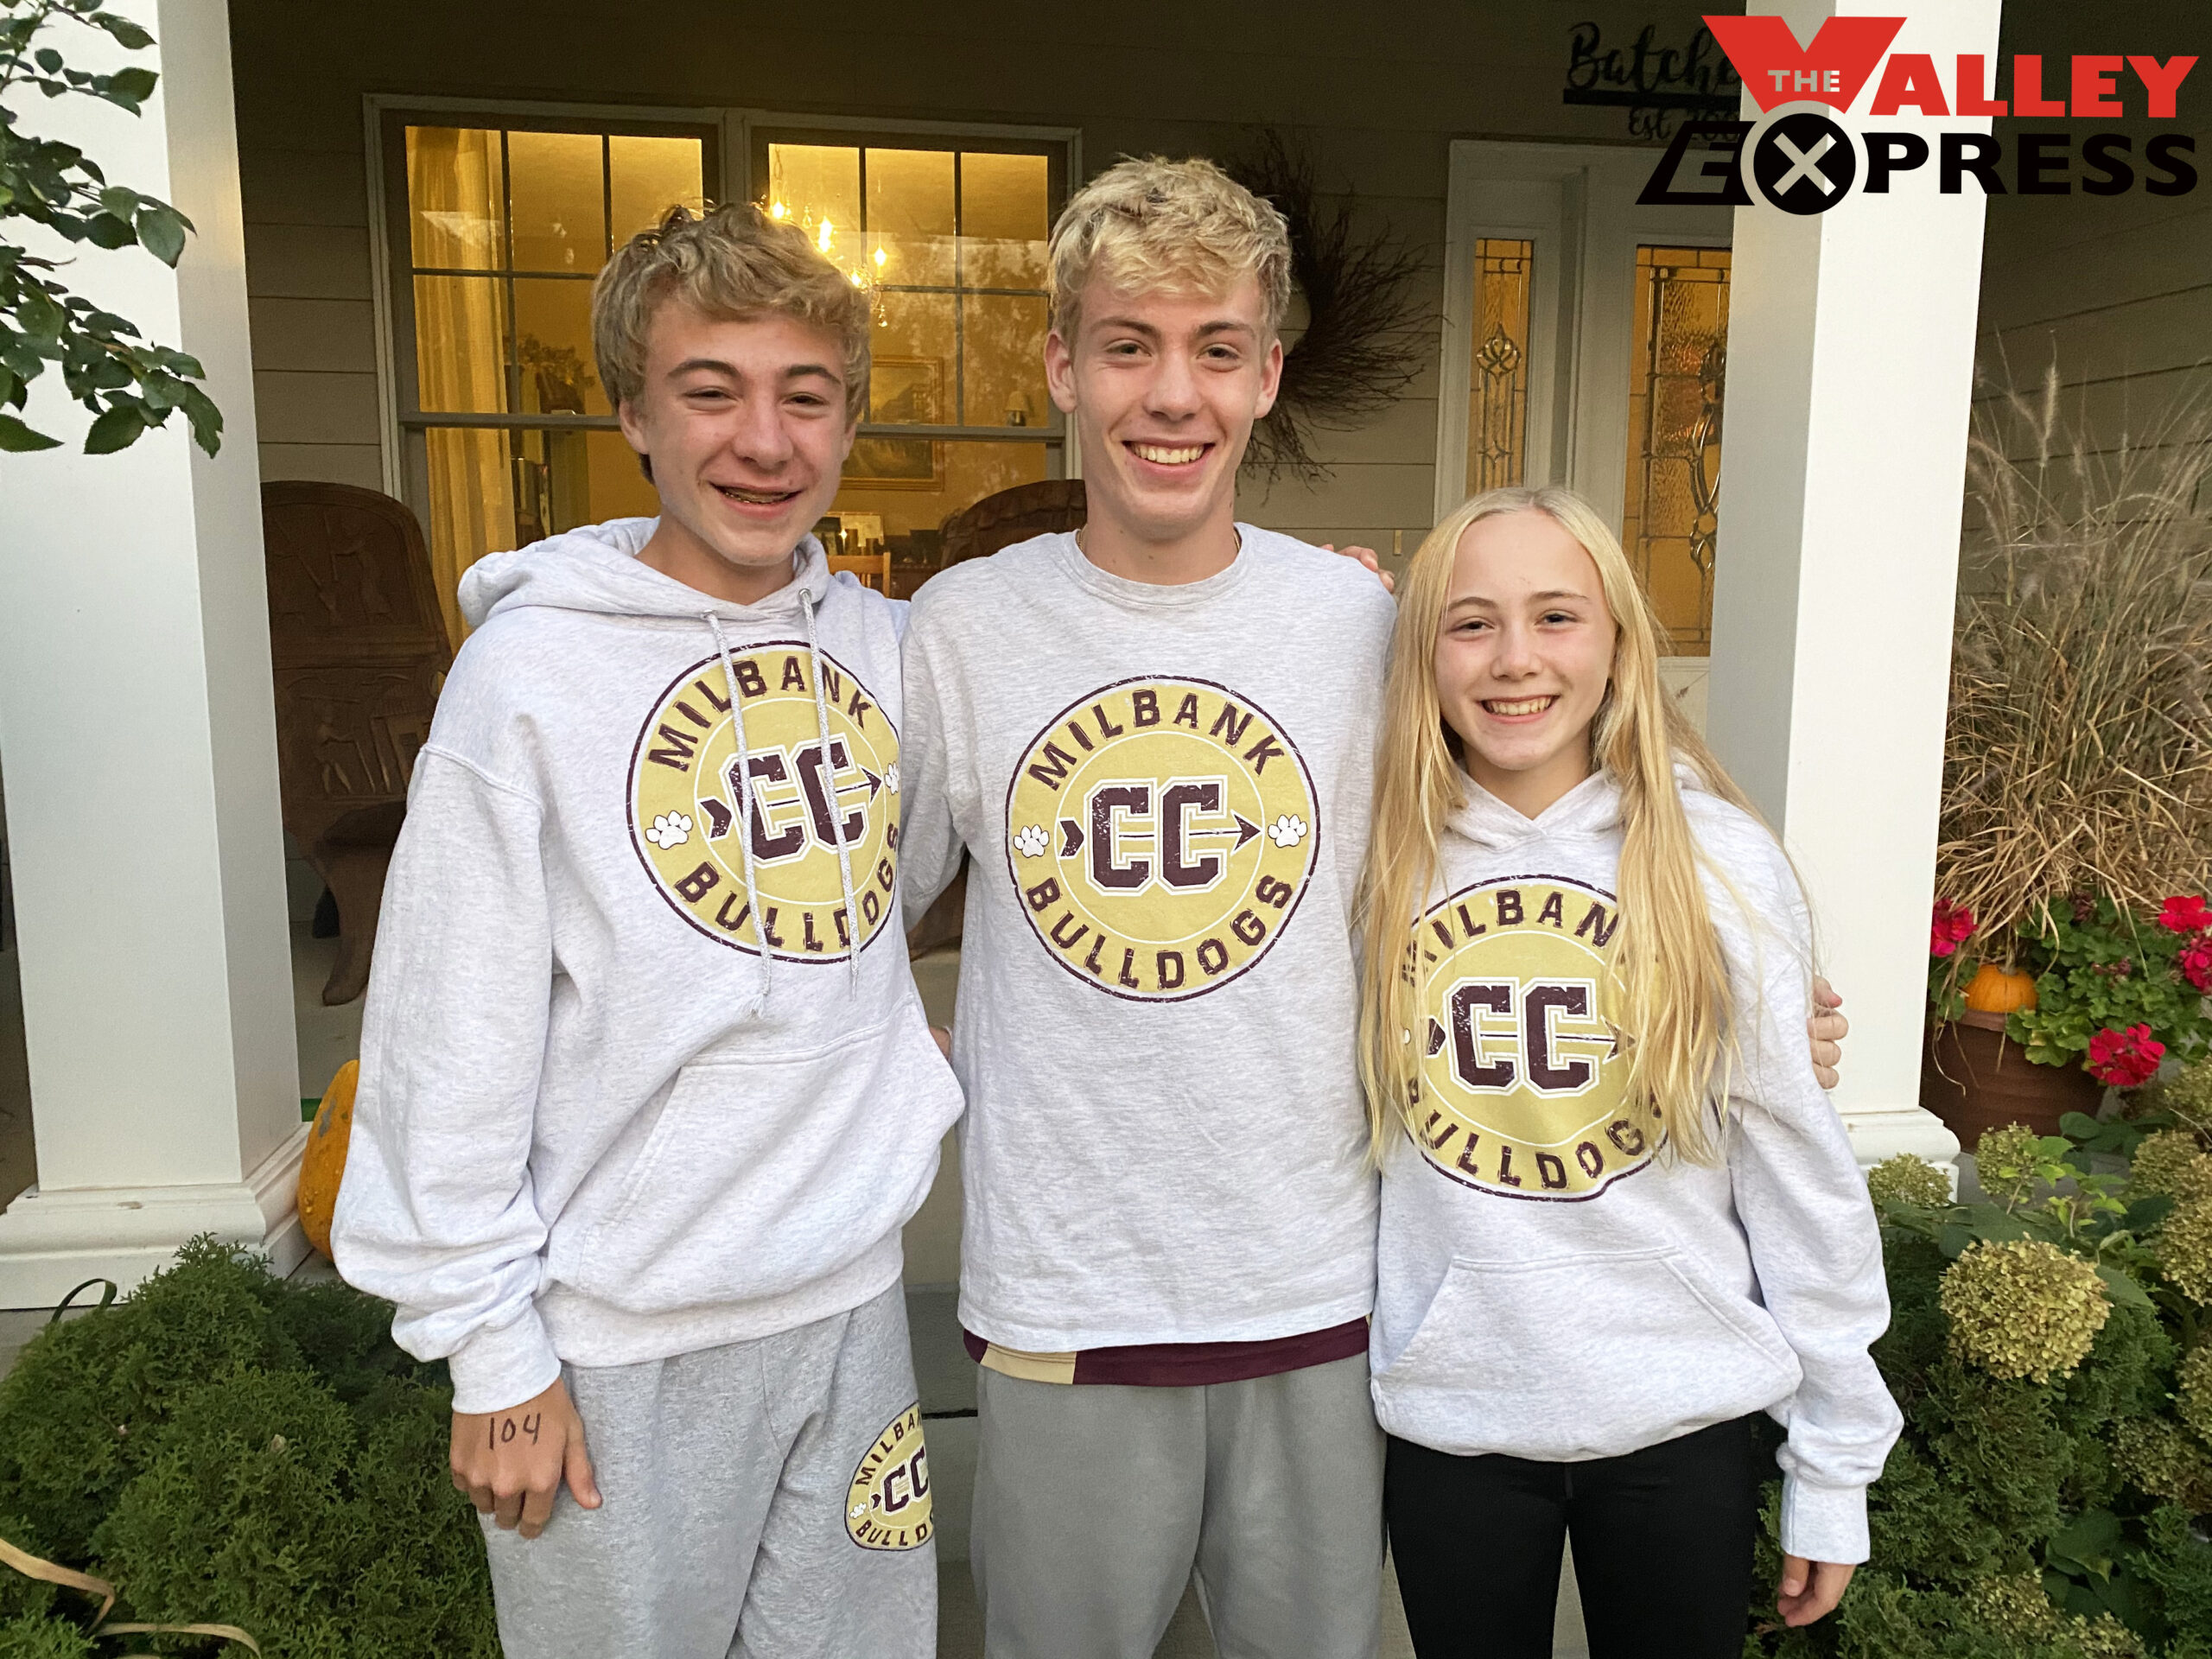 Batchelor Siblings Race Together At State